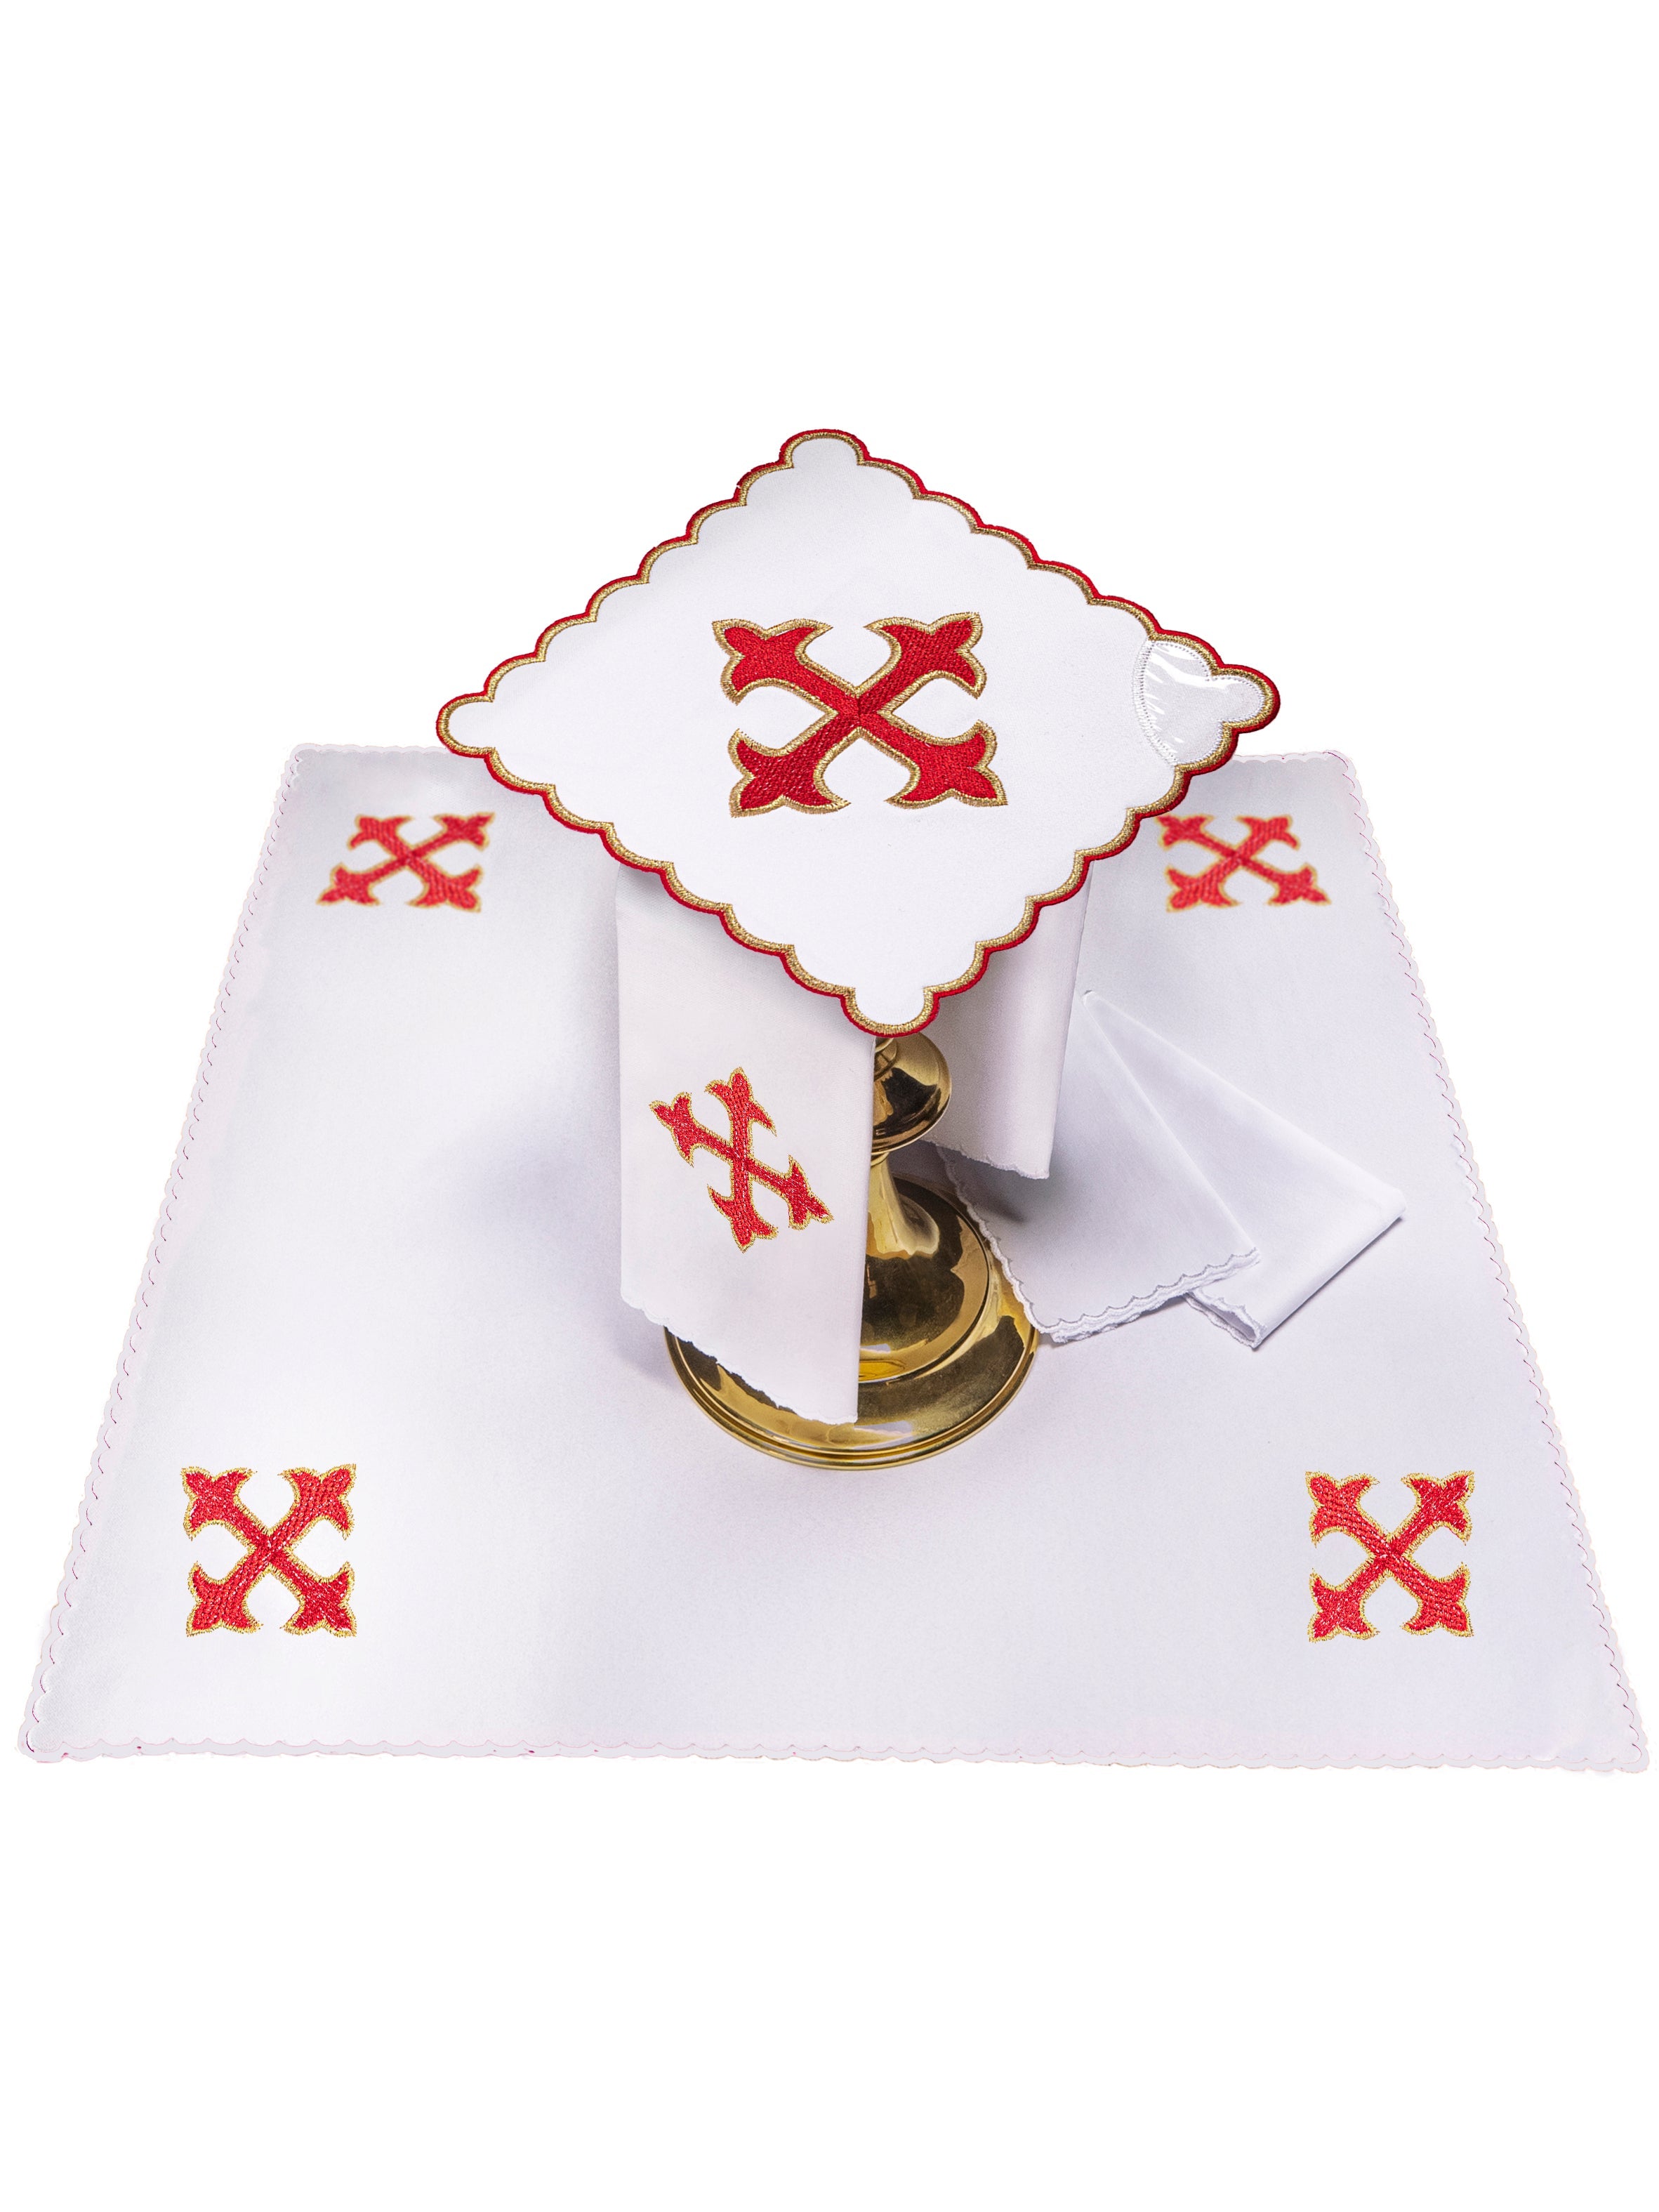 Chalice linen embroidered Red Cross